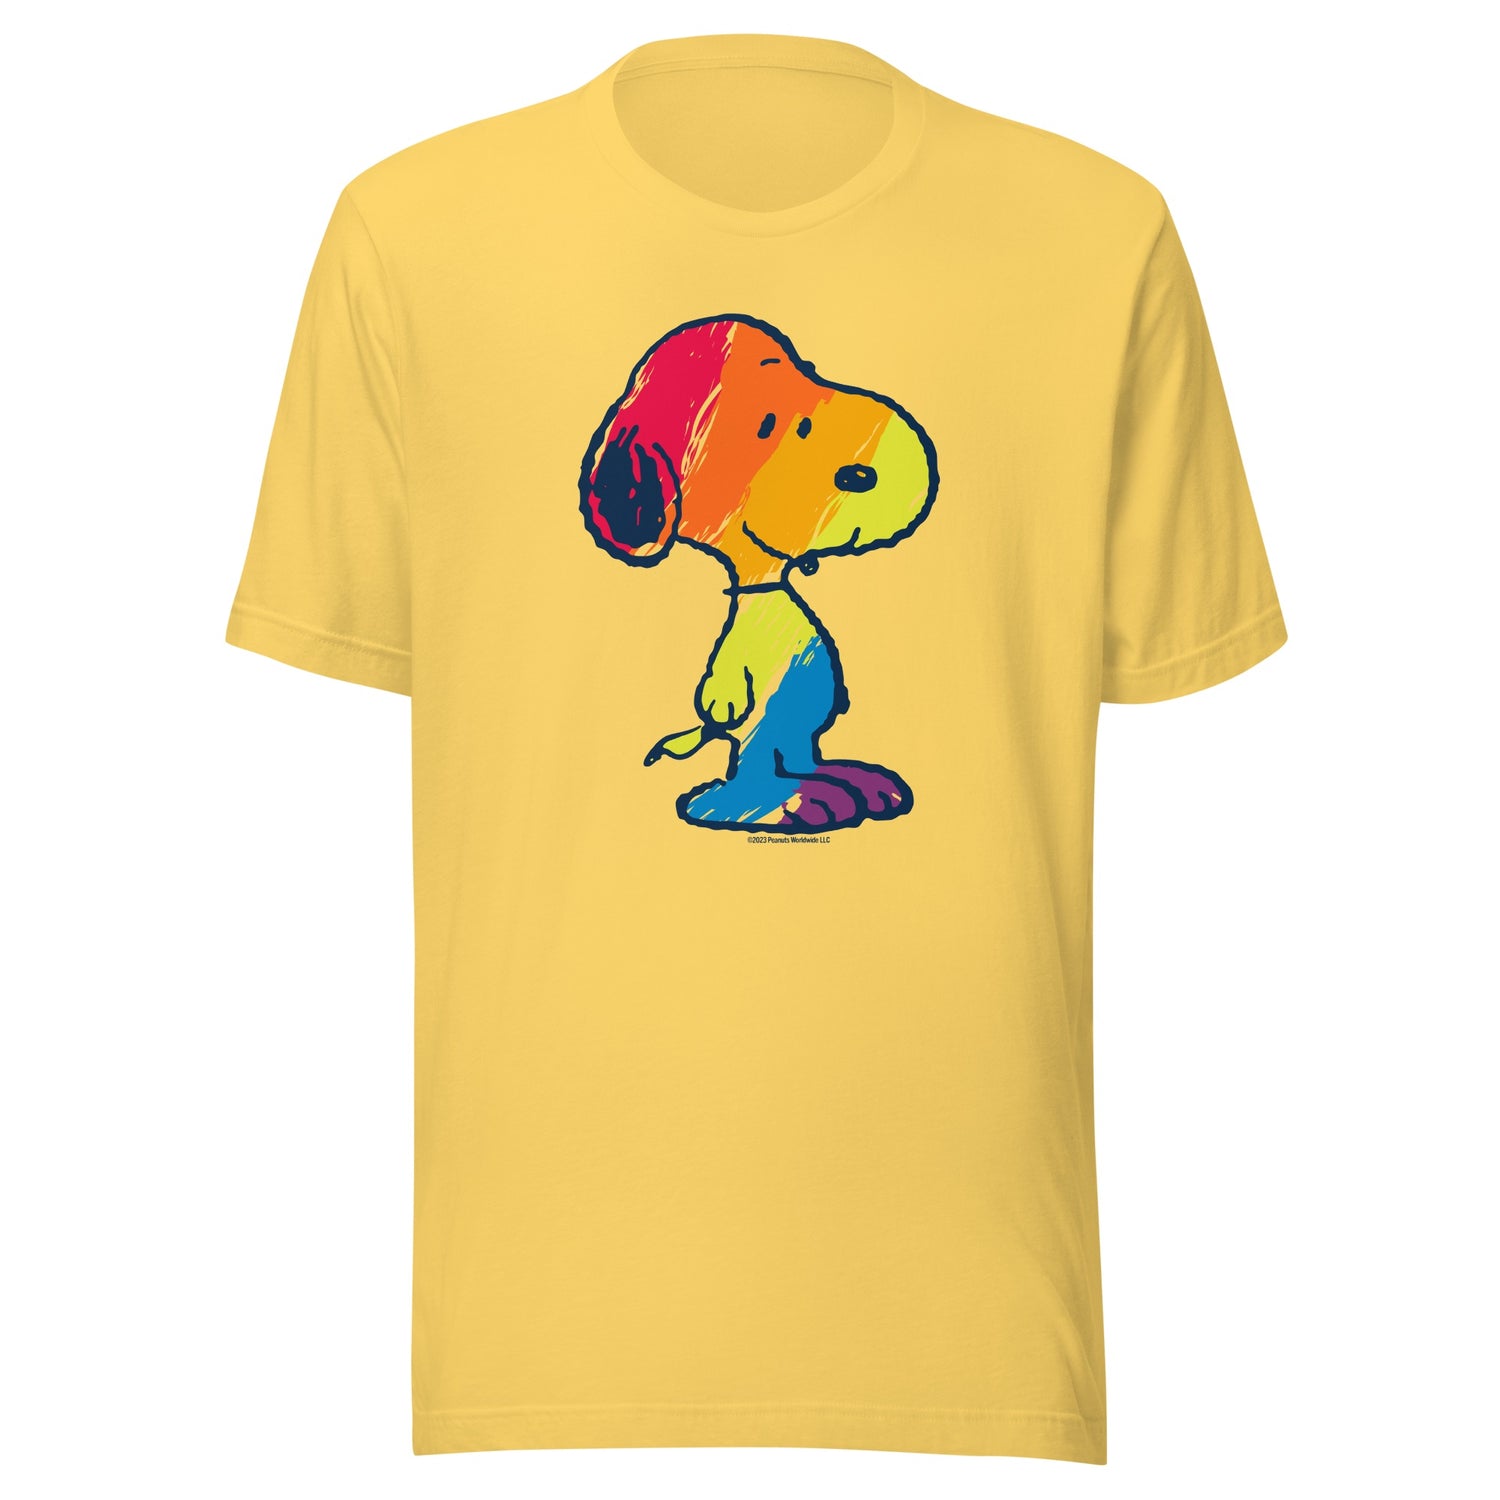 The Colored Adult Store – Rainbow Snoopy Peanuts T-Shirt